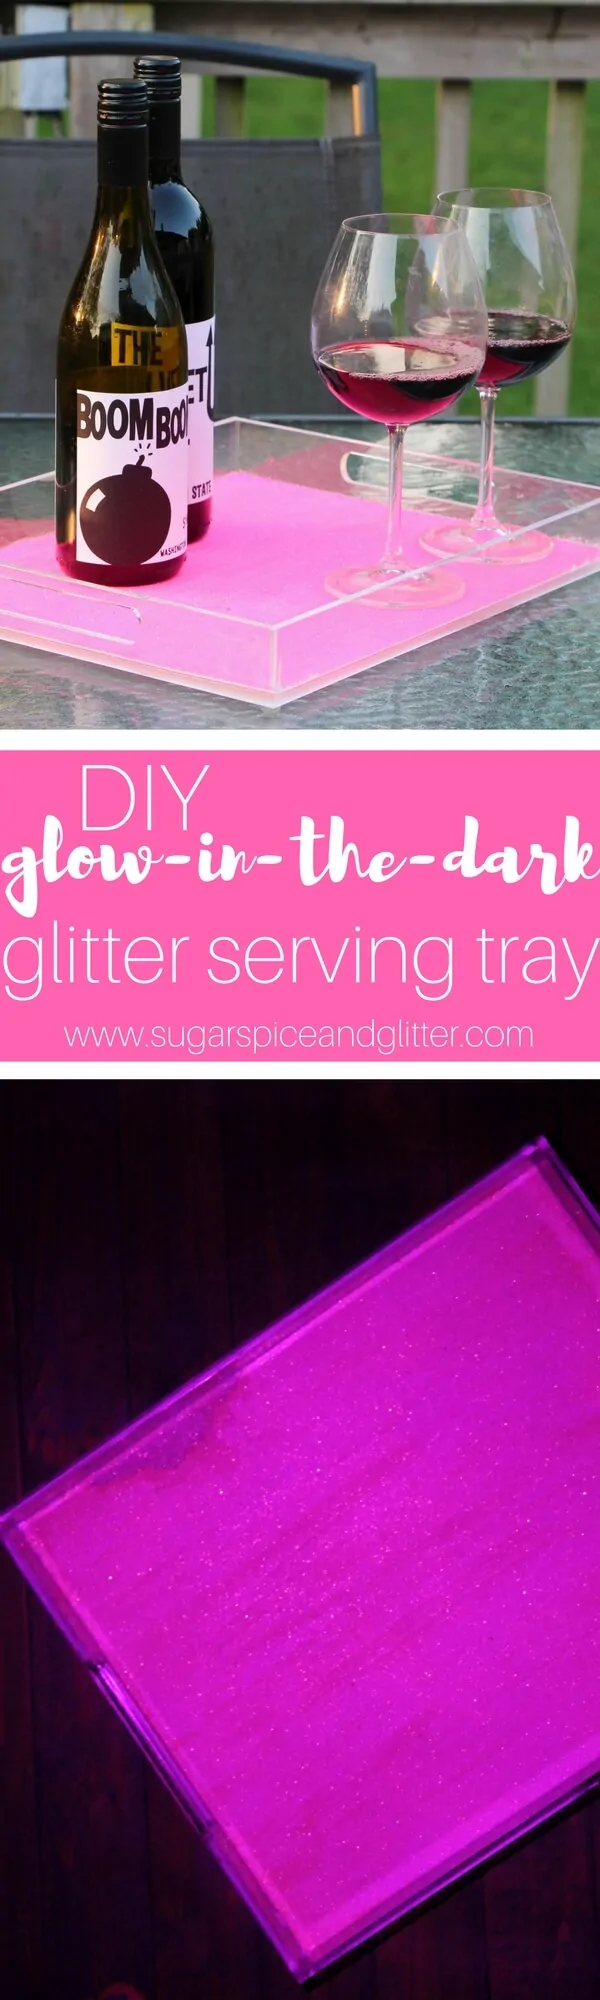 DIY Glitter Glow-in-the-Dark Tray is the perfect entertaining DIY, especially for nighttime cocktails